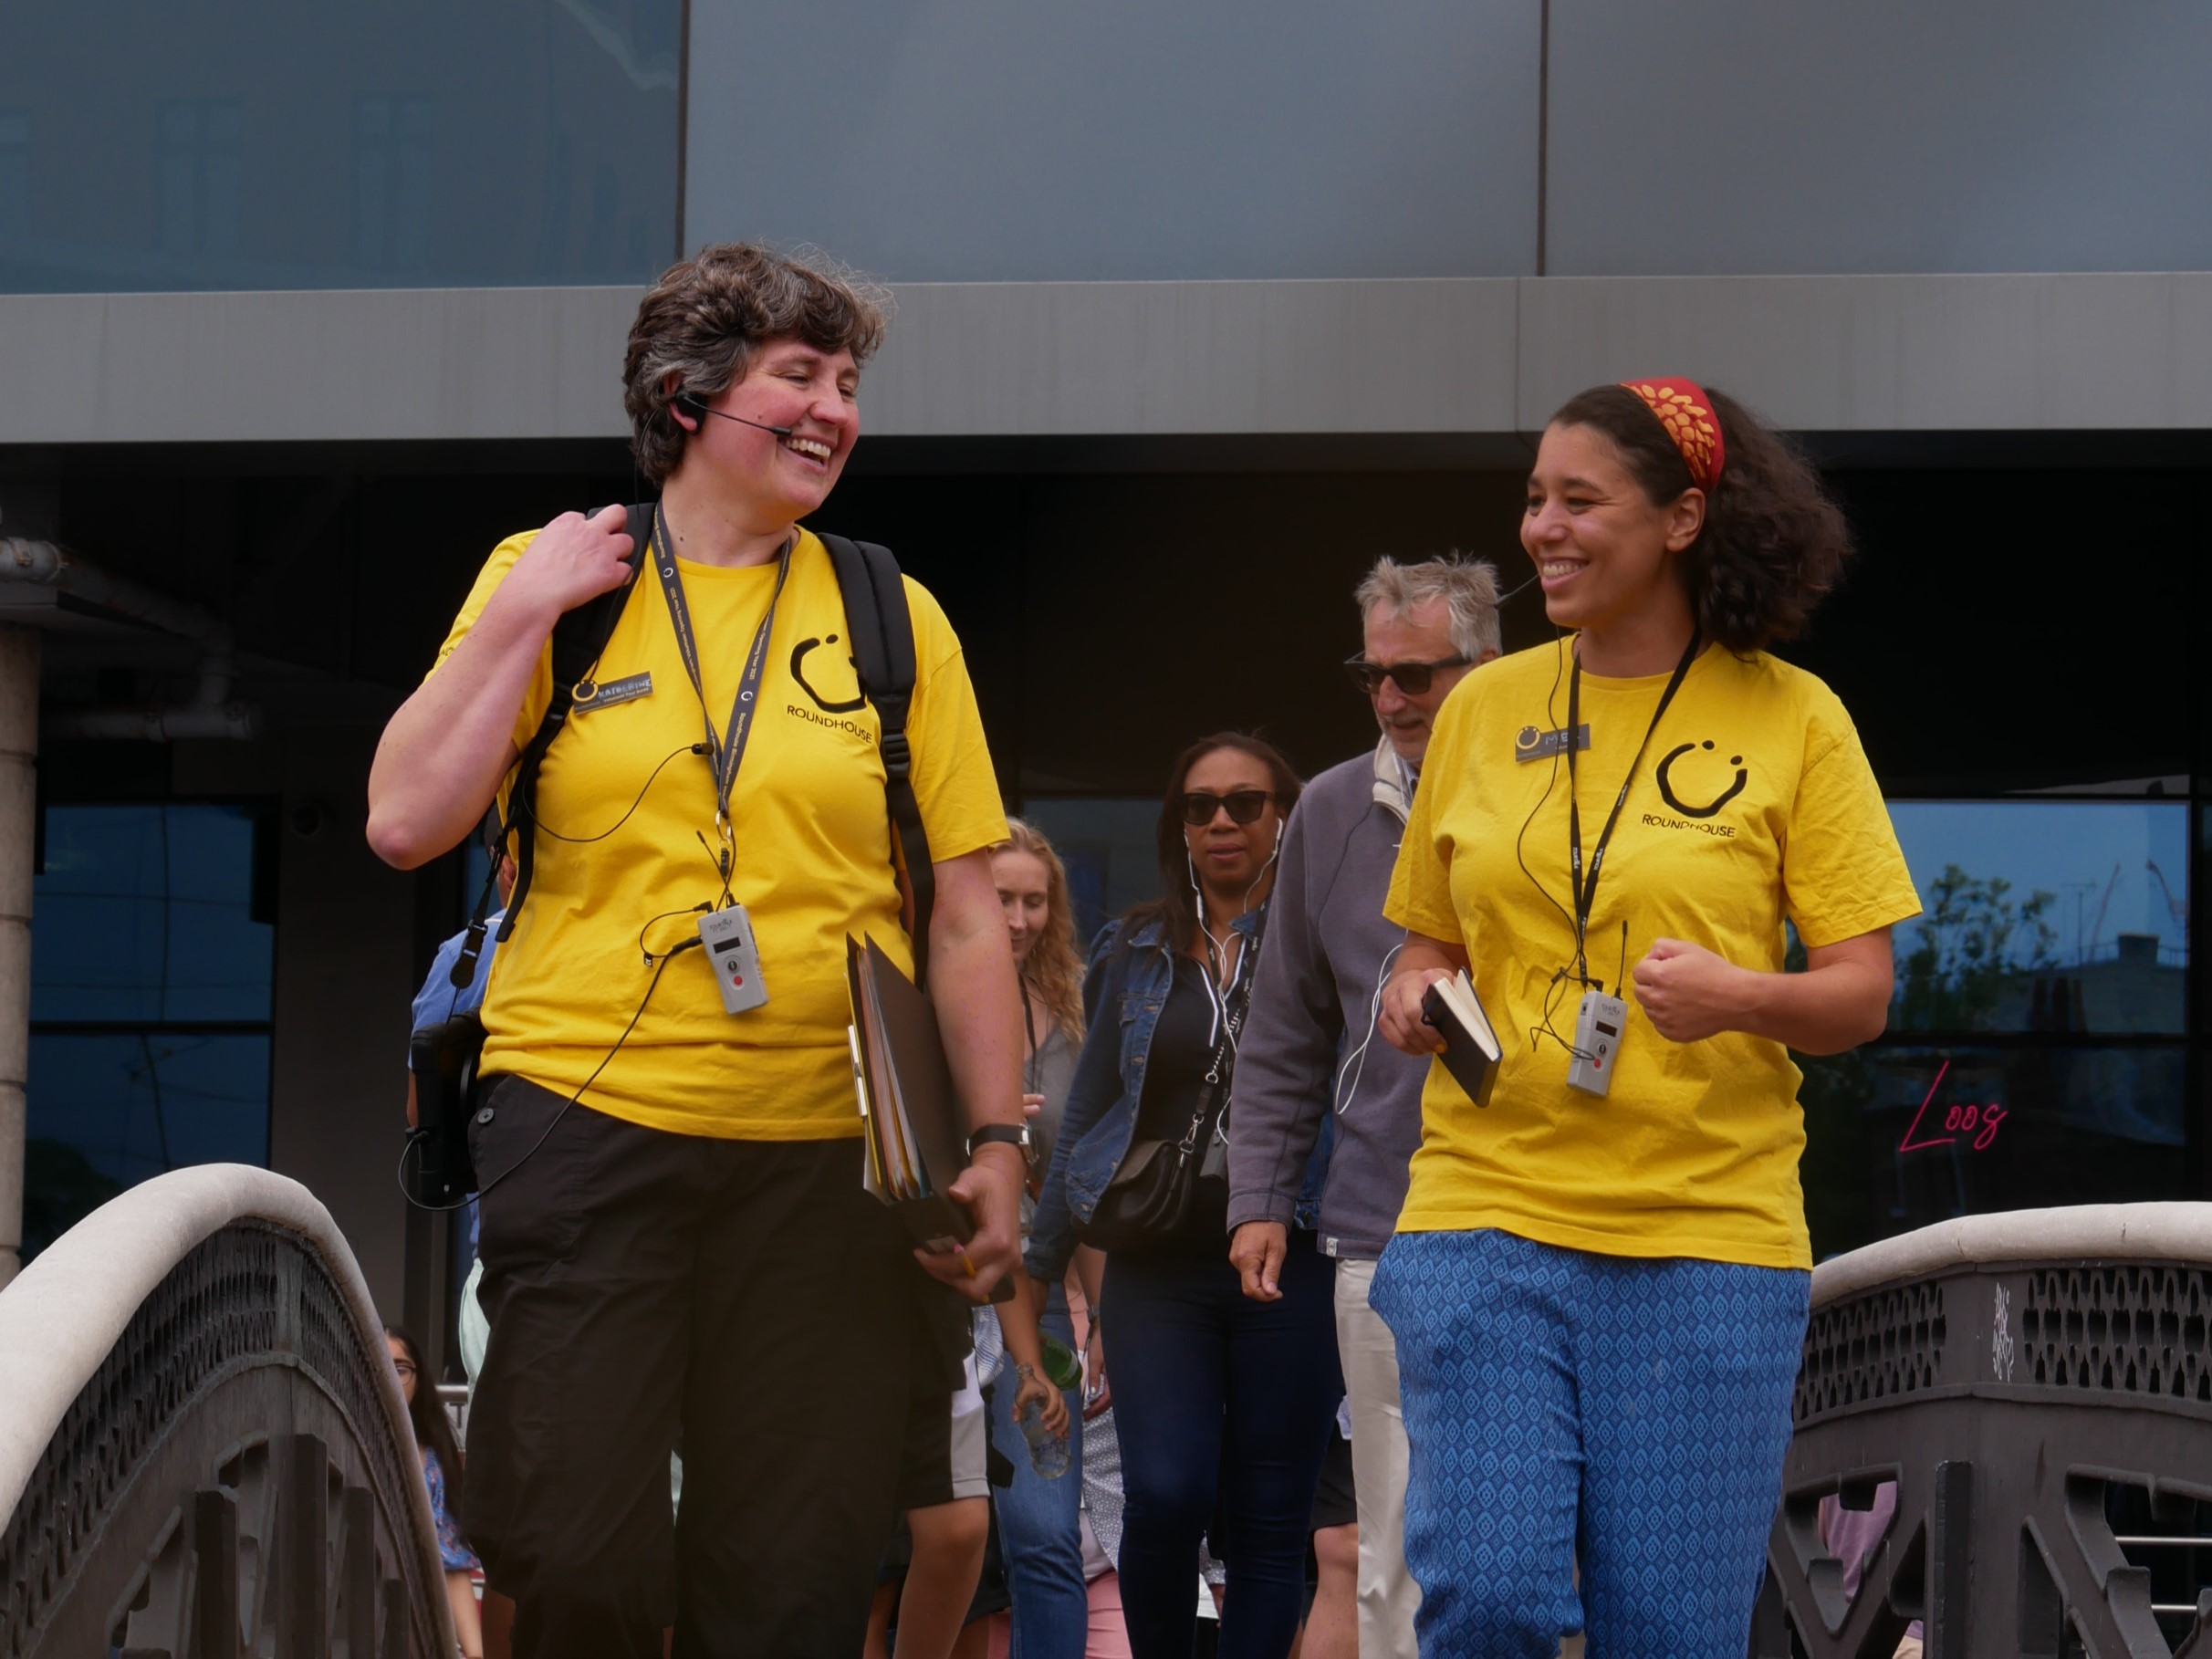 A landscape image showing two people in yellow t-shirts leading a group of people over a bridge. They are laughing and smiling at each other.